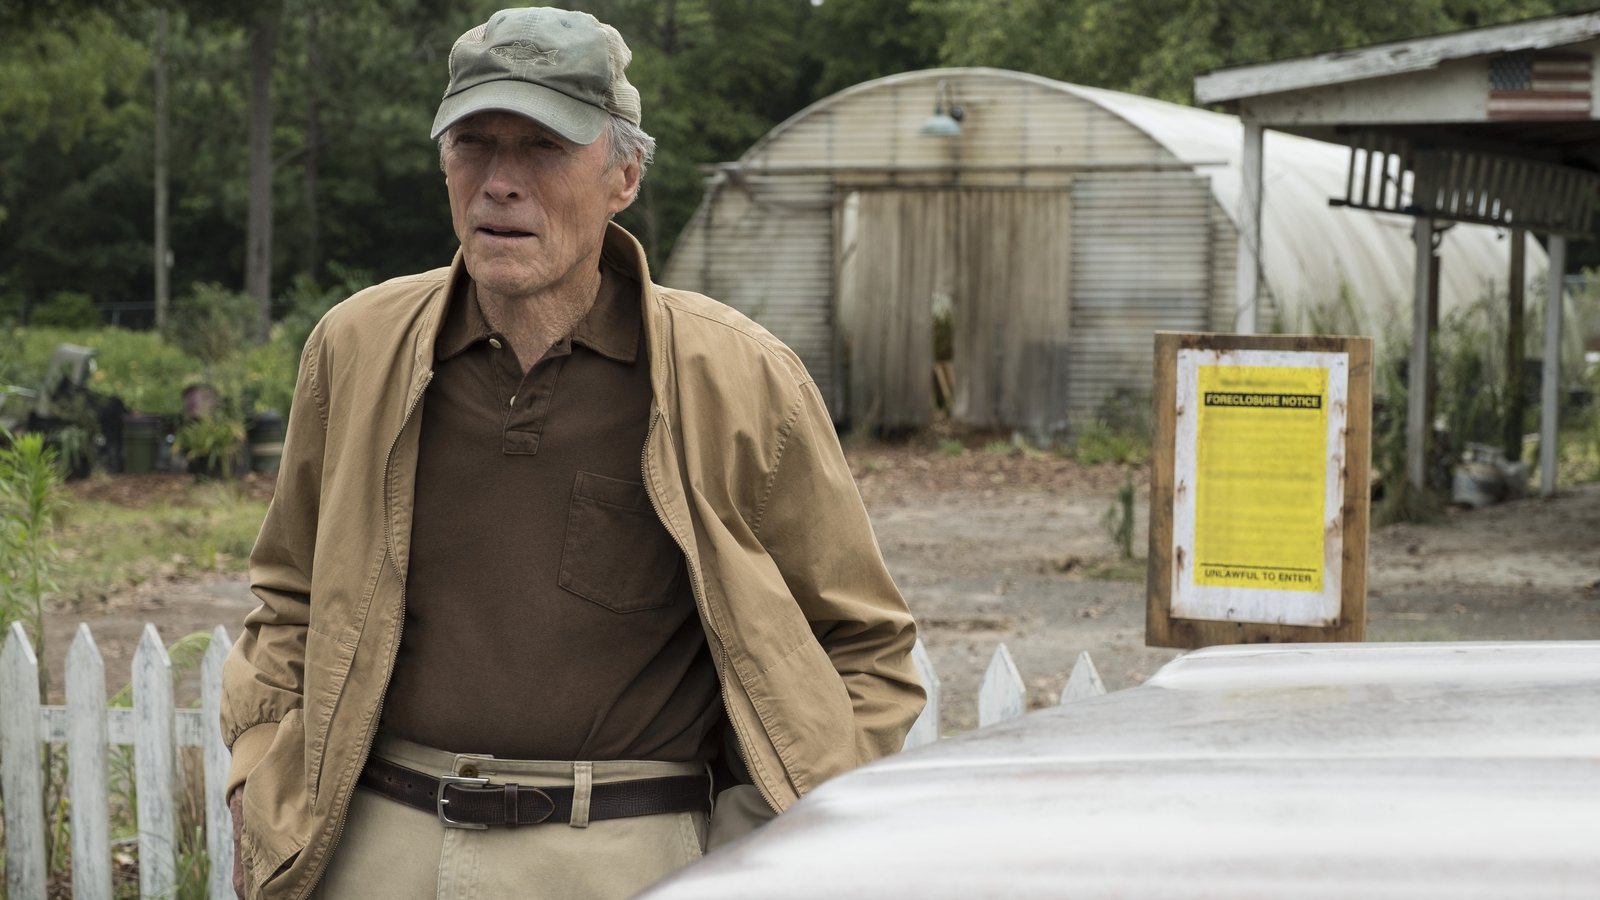 Watch Clint Eastwood discusses new film The Mule